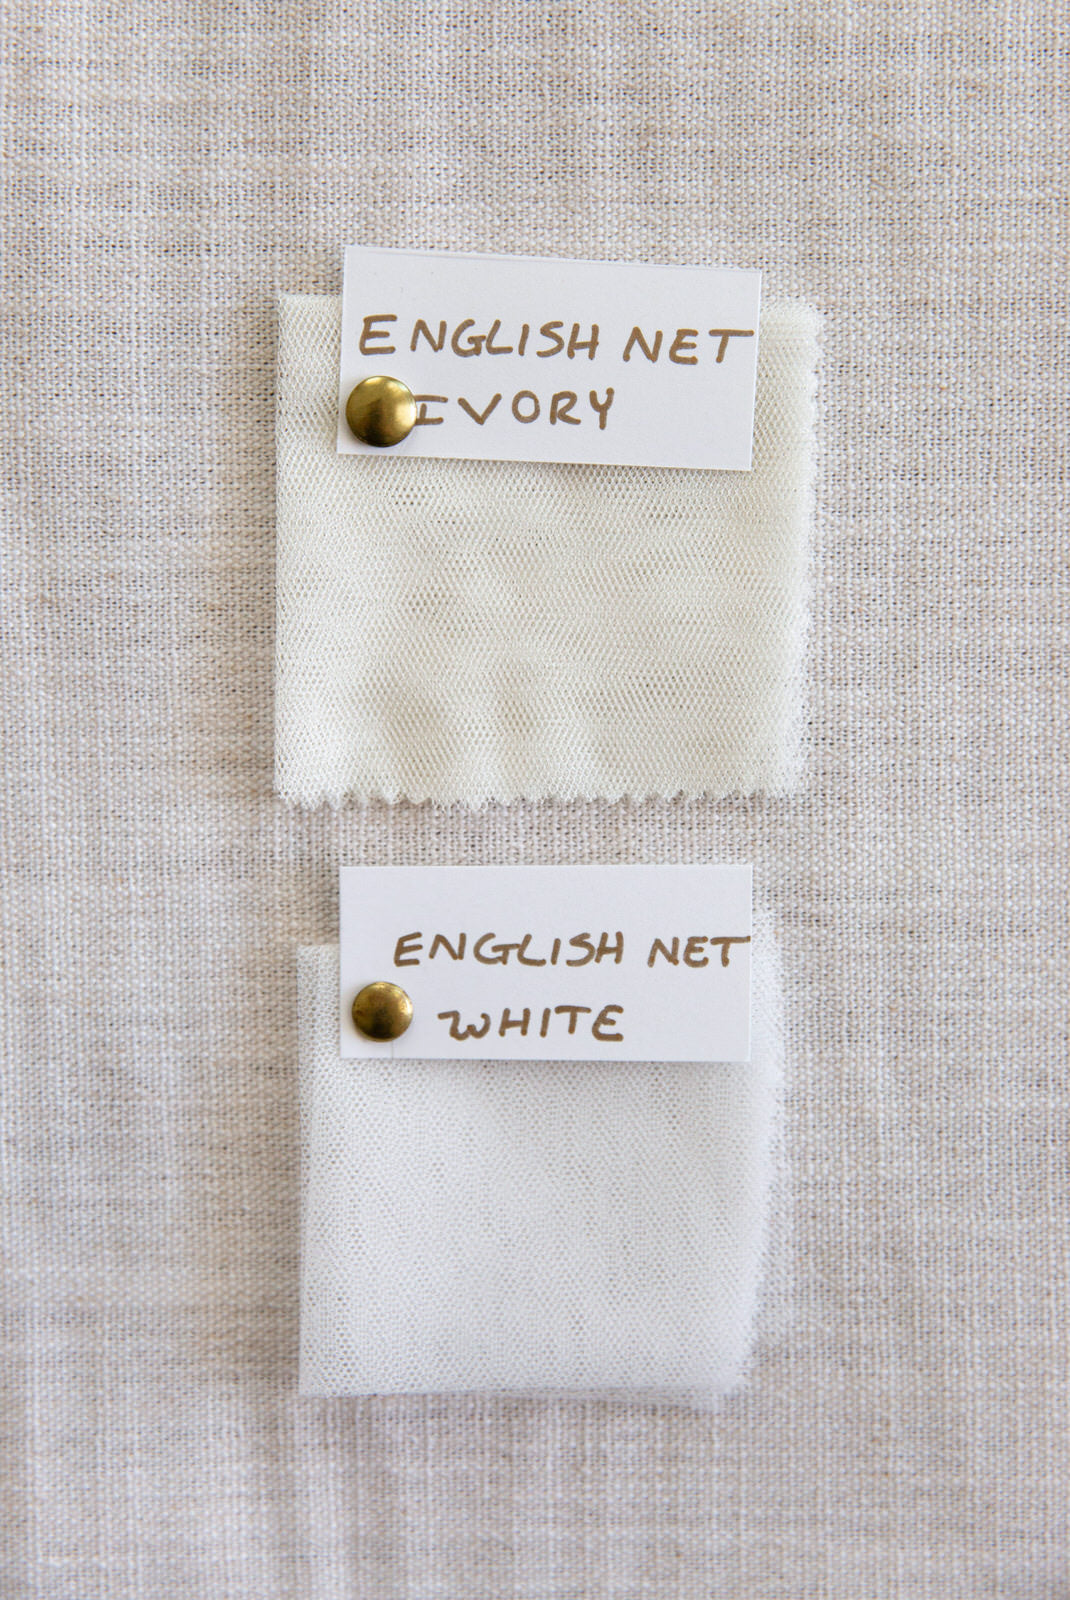 English net soft fabric for wedding veils in ivory or white